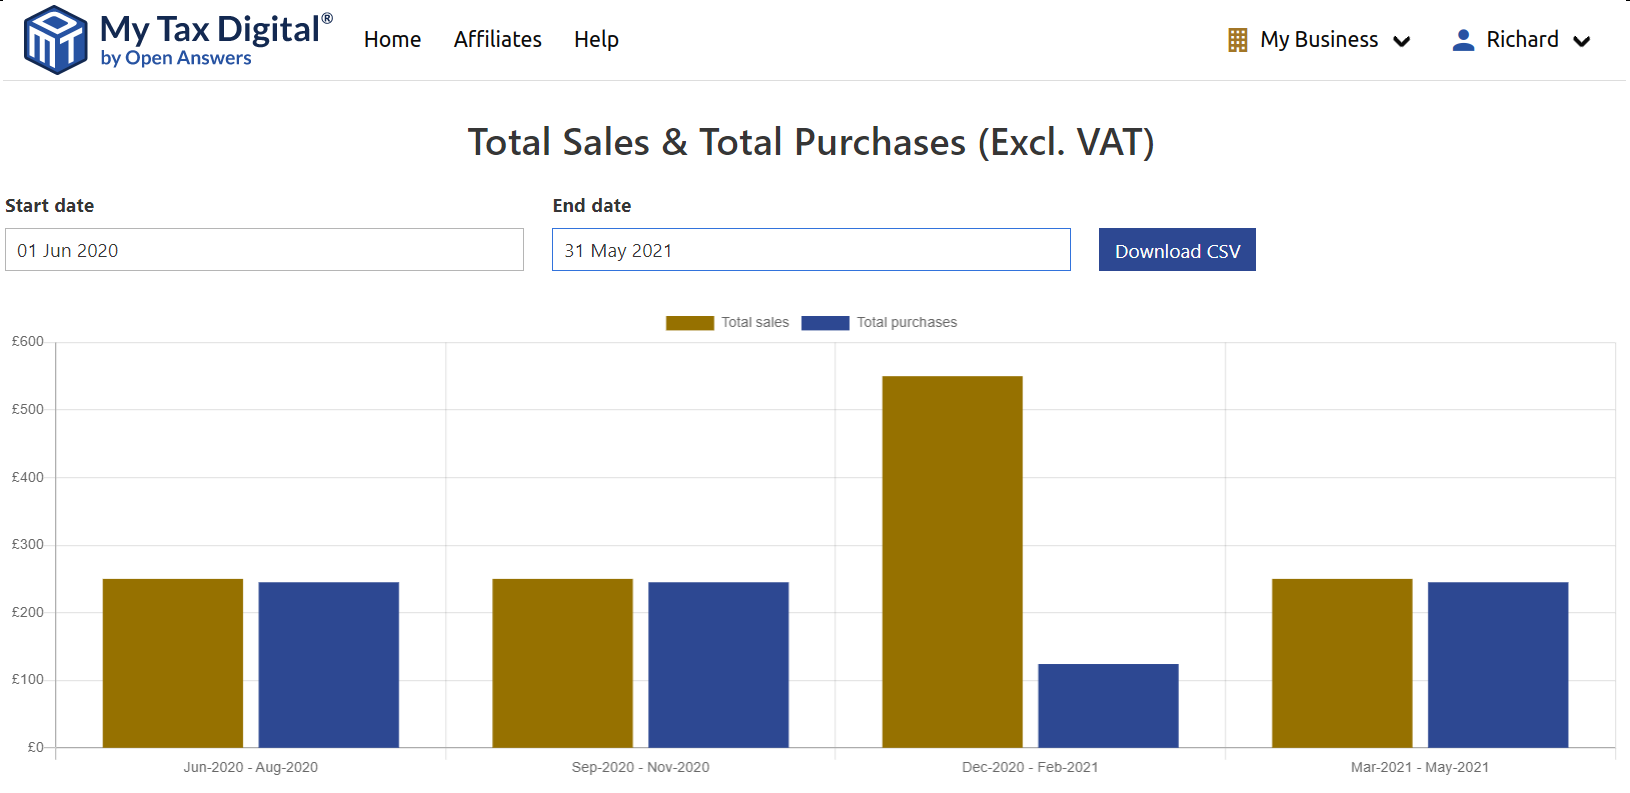 My Tax Digital Total Sales & Total Purchases (Excl. VAT) bar chart